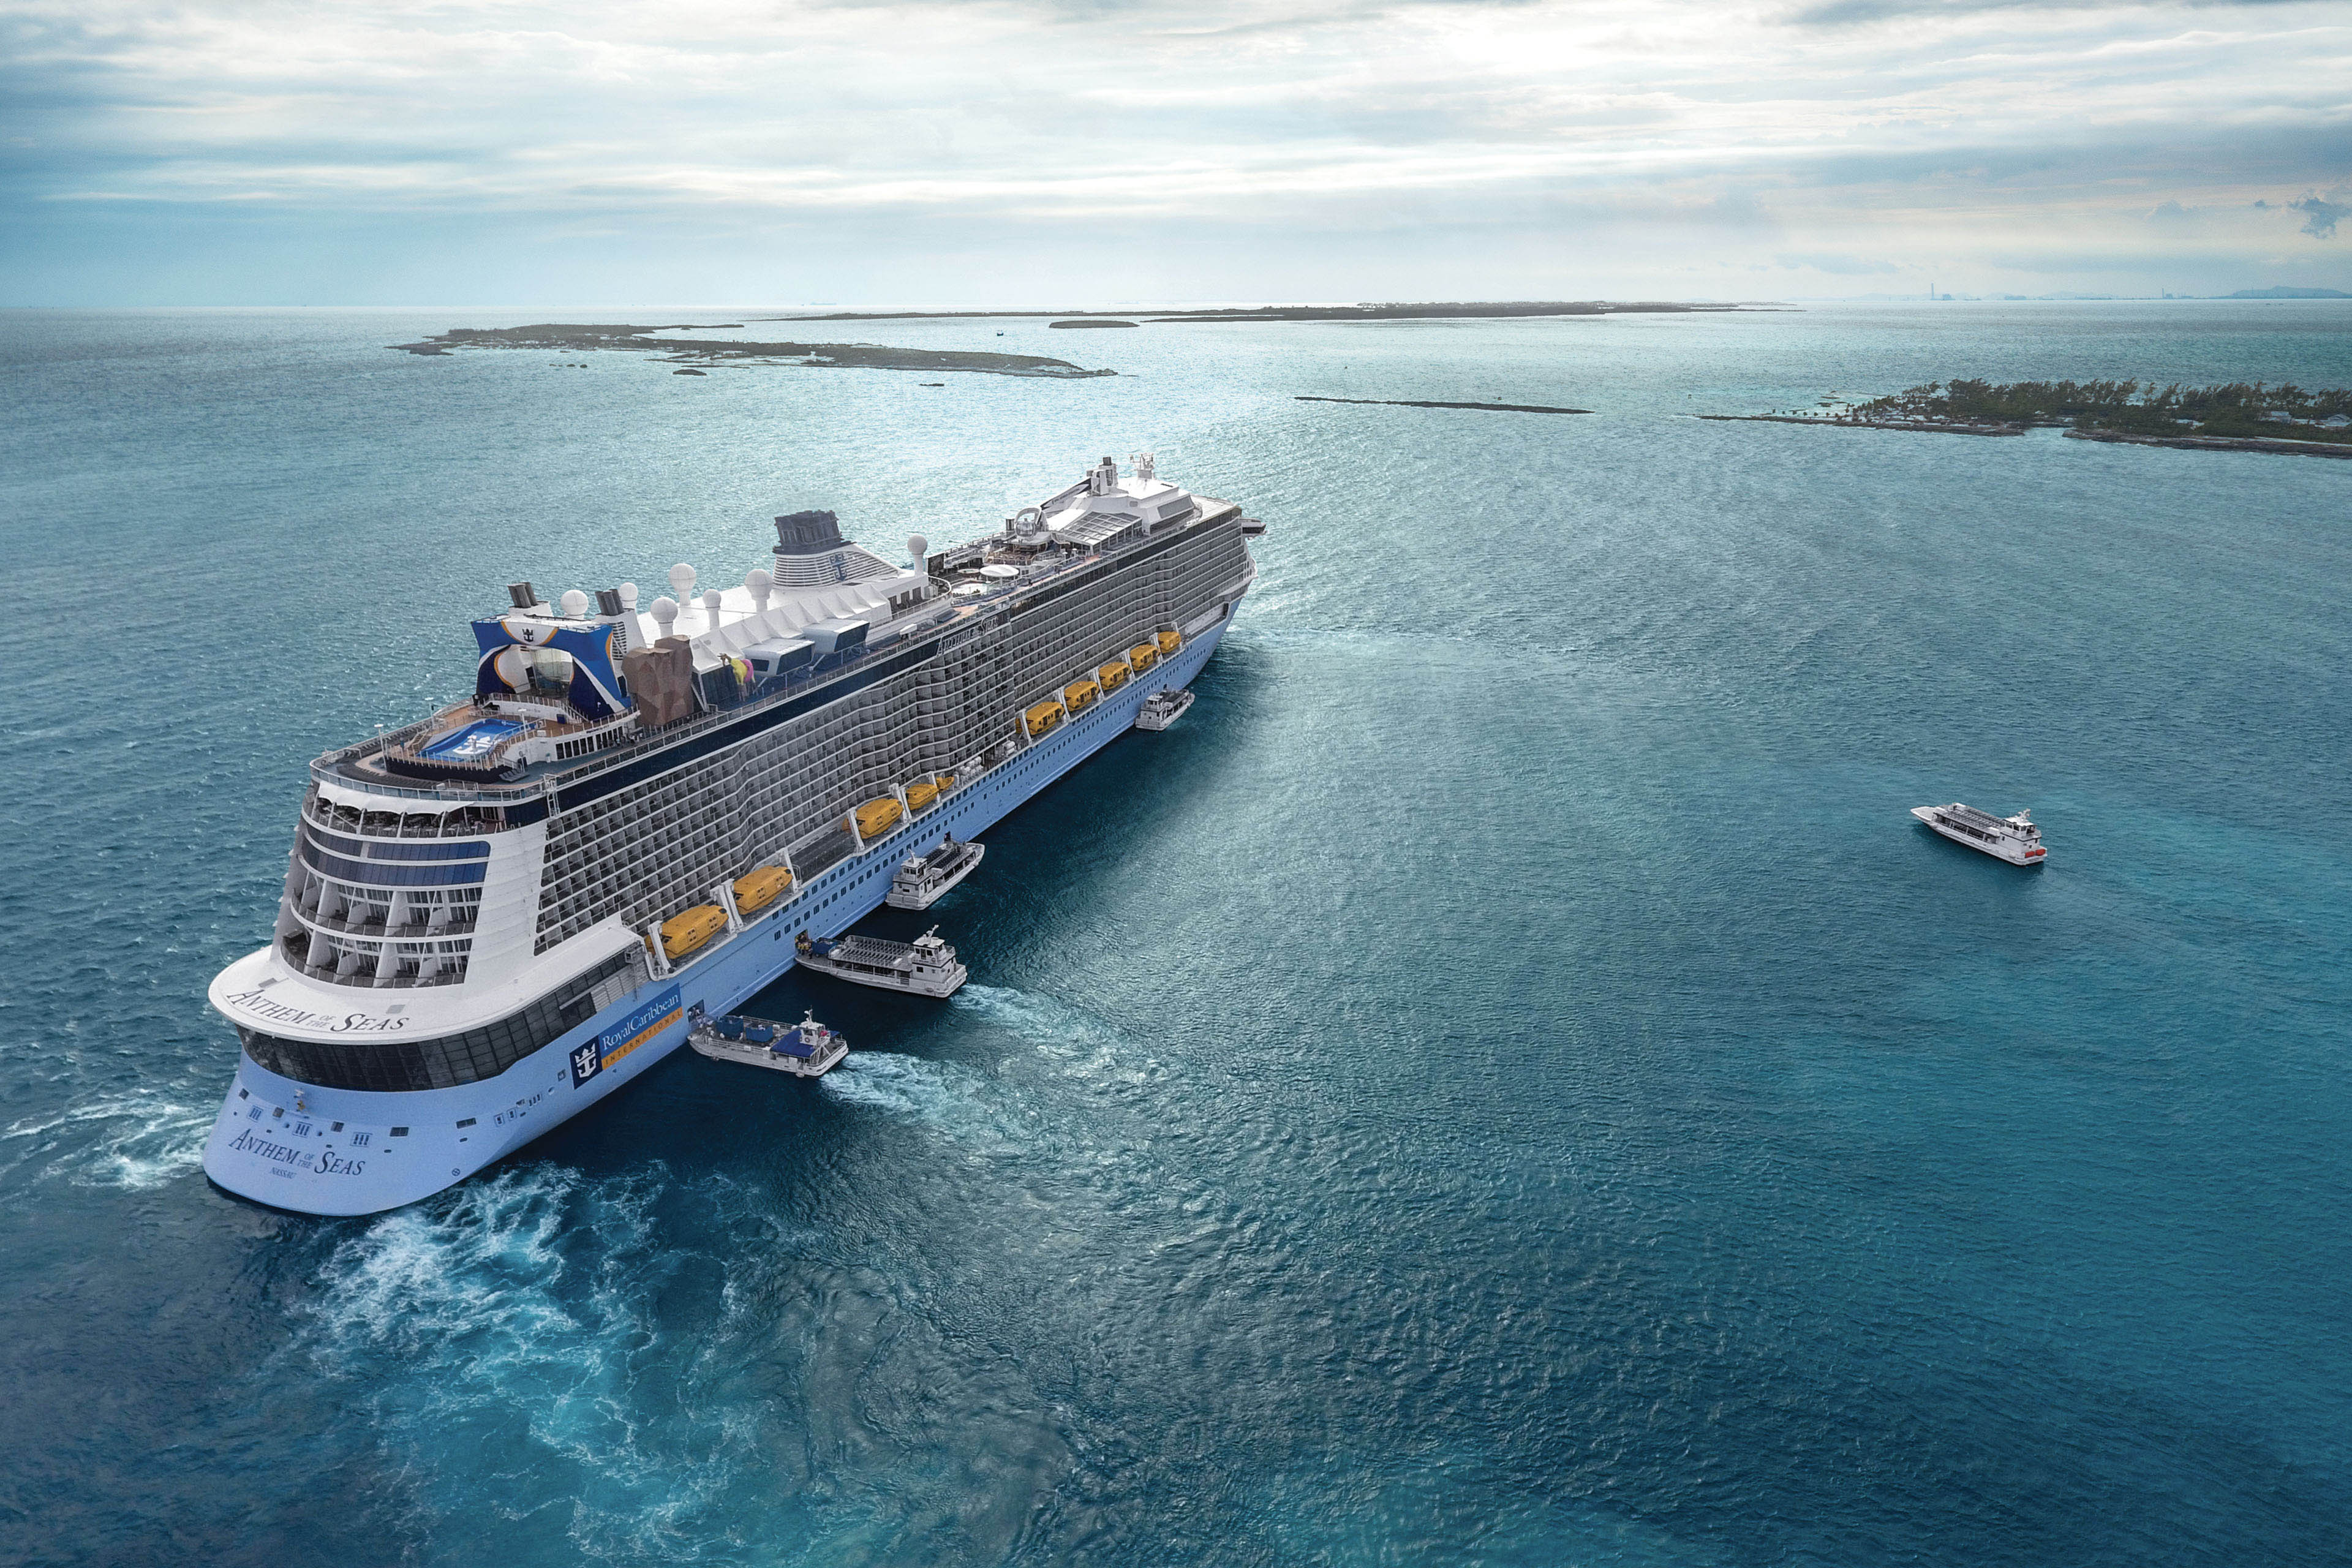 The whole journey–transformed. Royal Caribbean’s digital transformation helps families have the best vacation time of their lives.